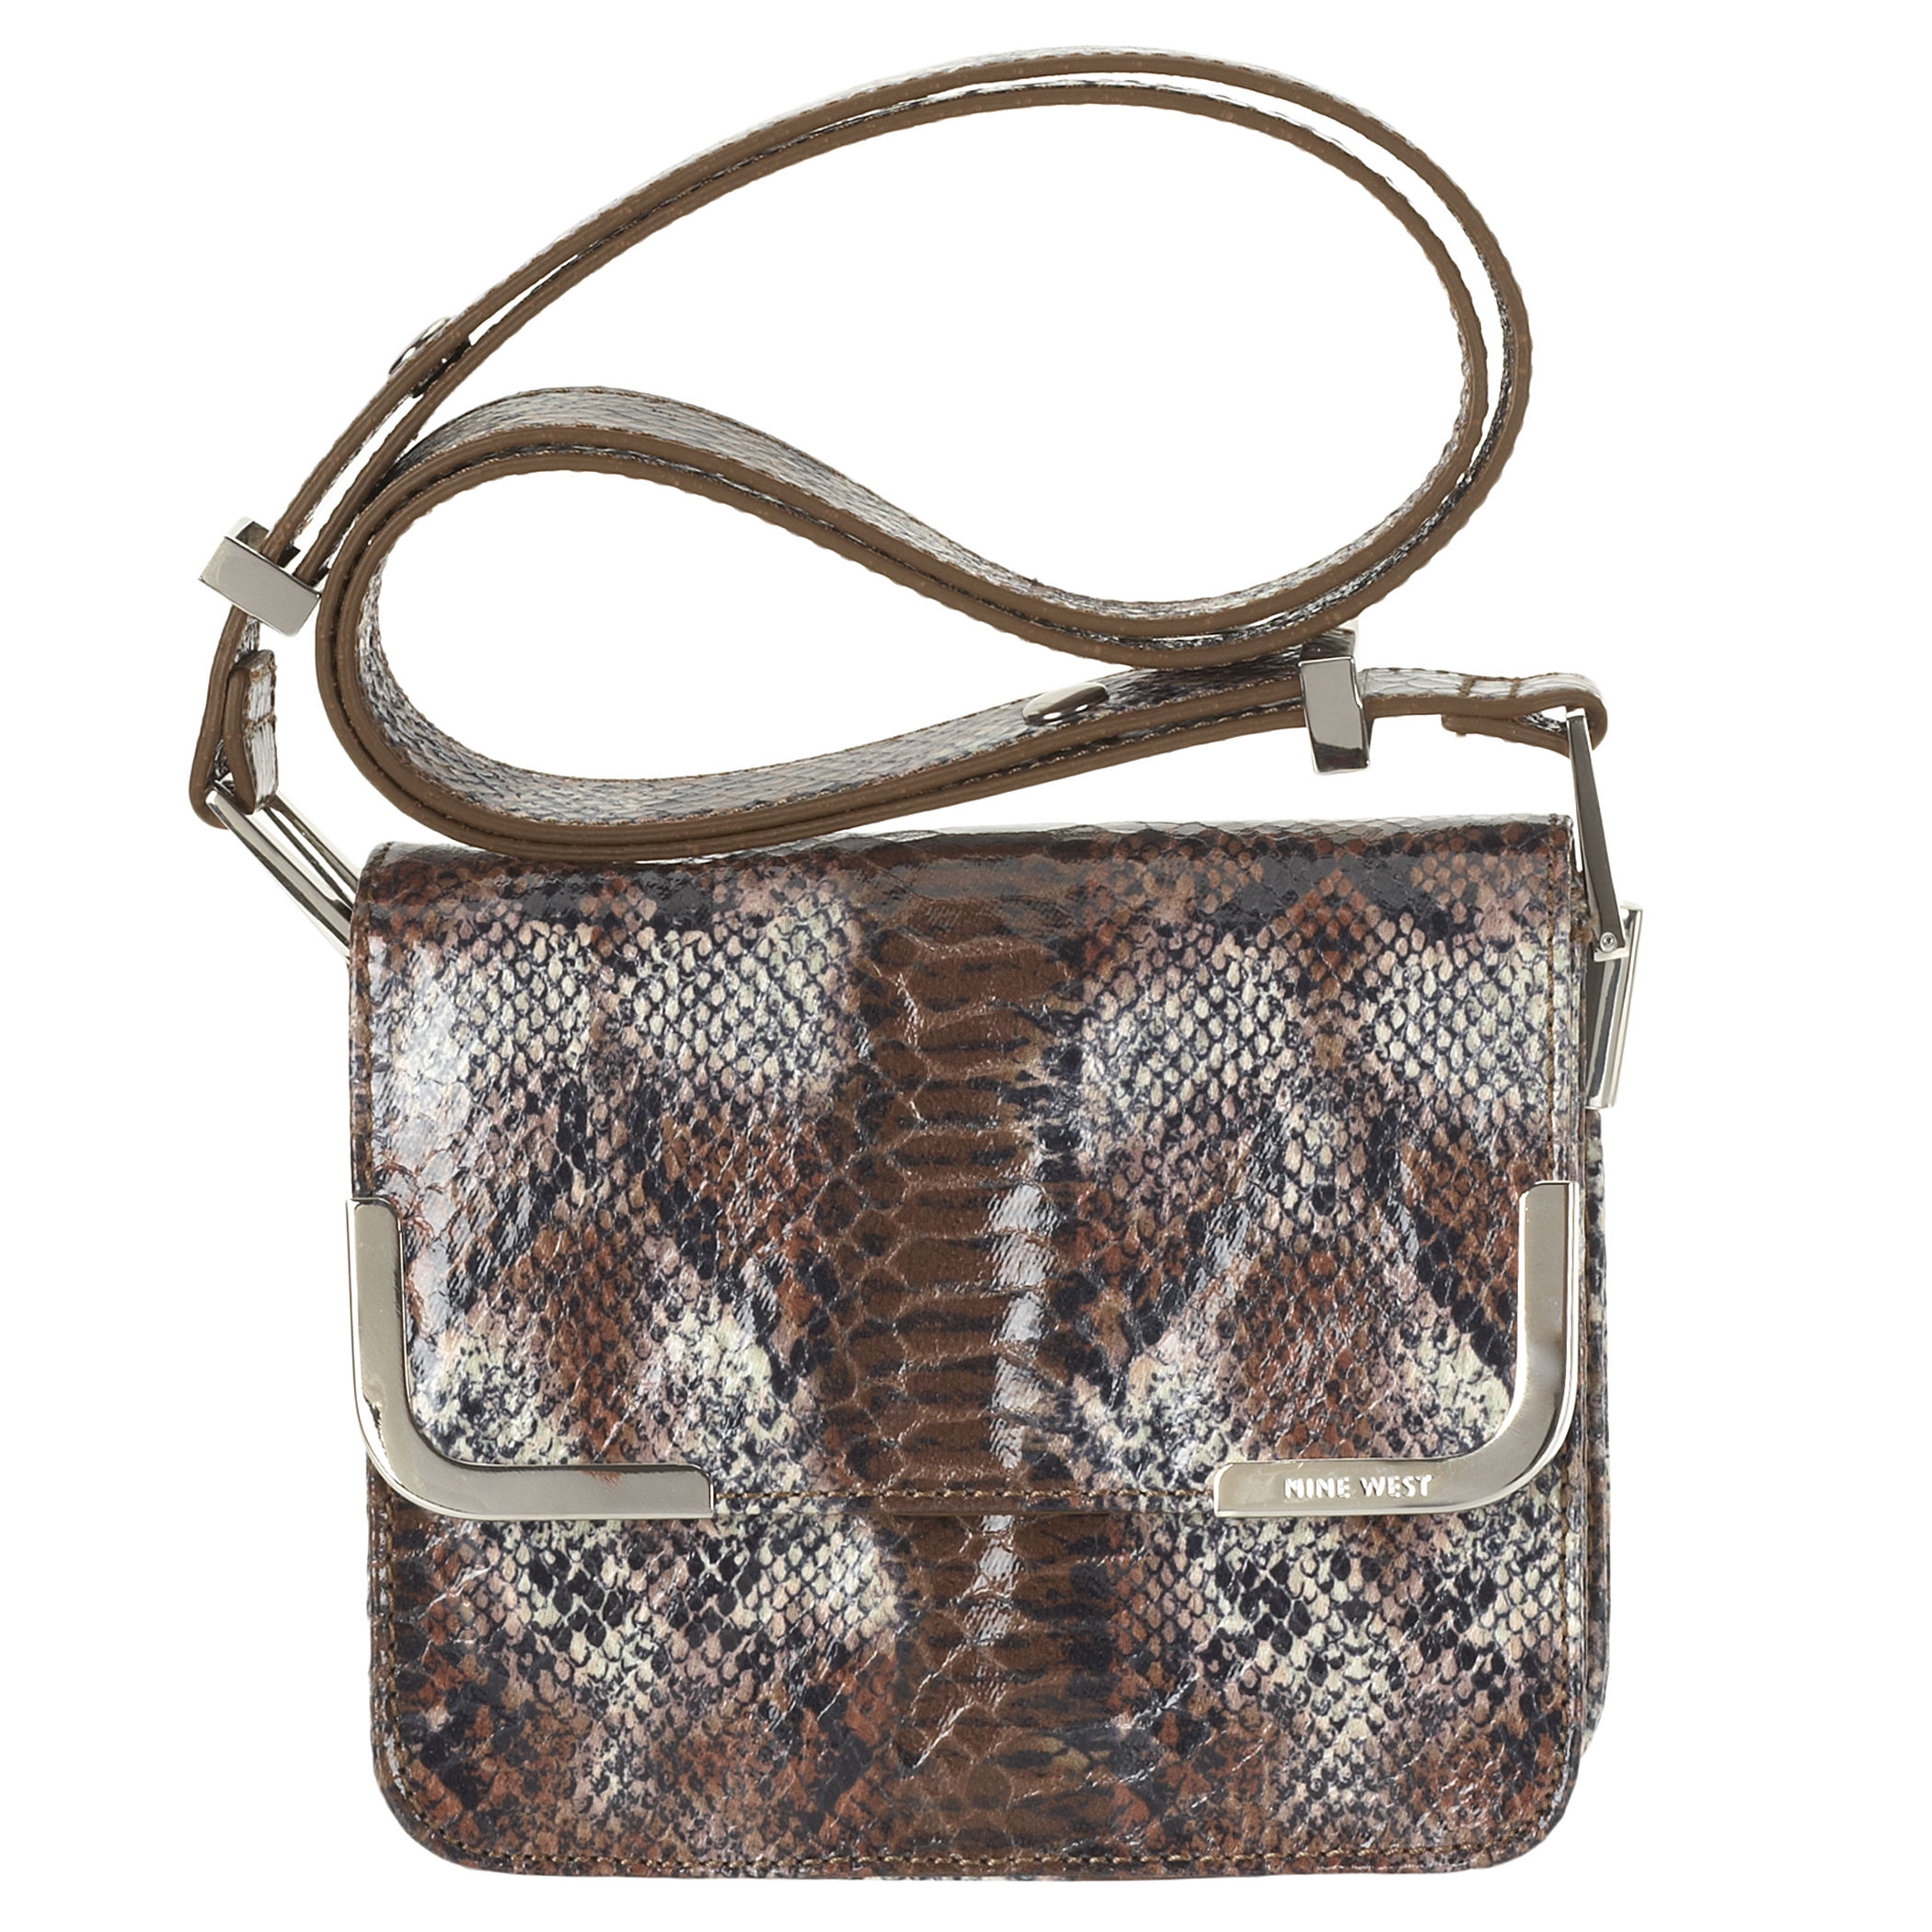 Nine West Chasey Convertible Cross Body Bag in Brown (brown multi sy)